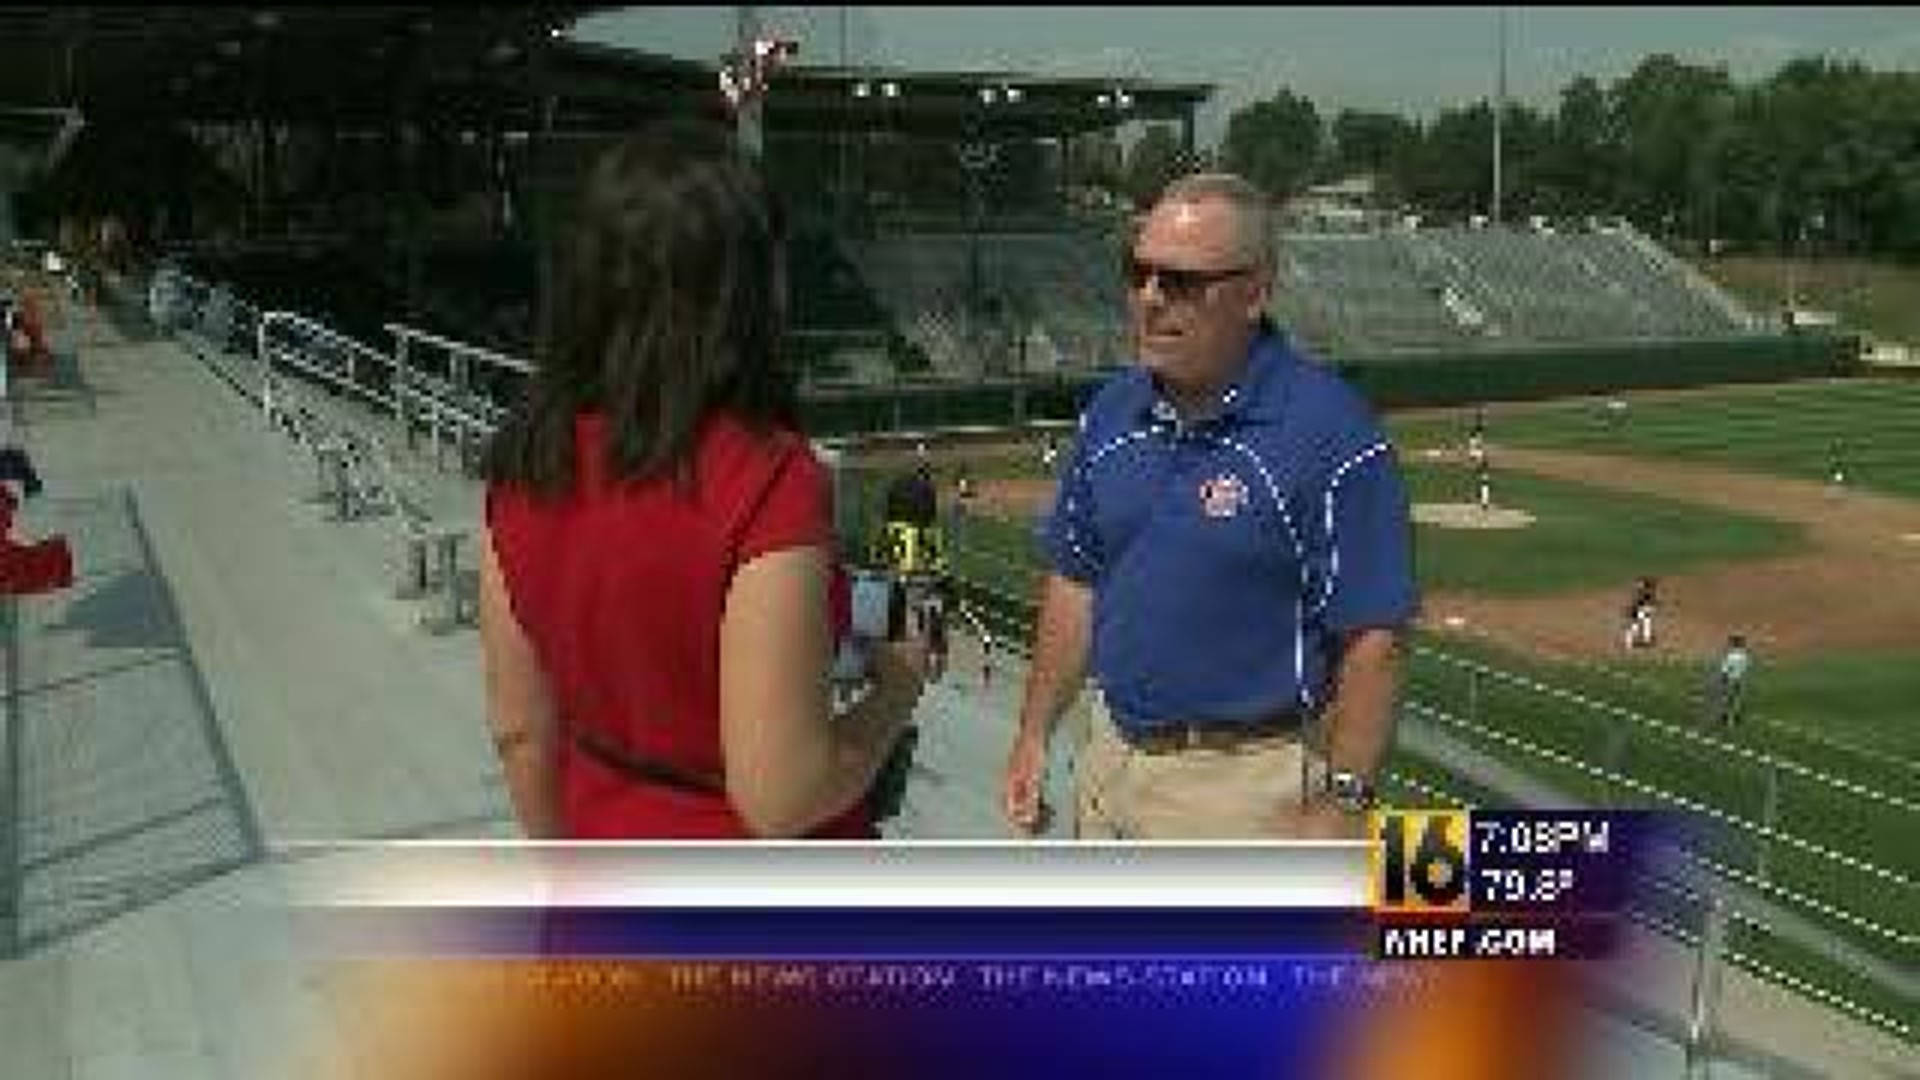 Local Umpire Gets the Call at Little League World Series